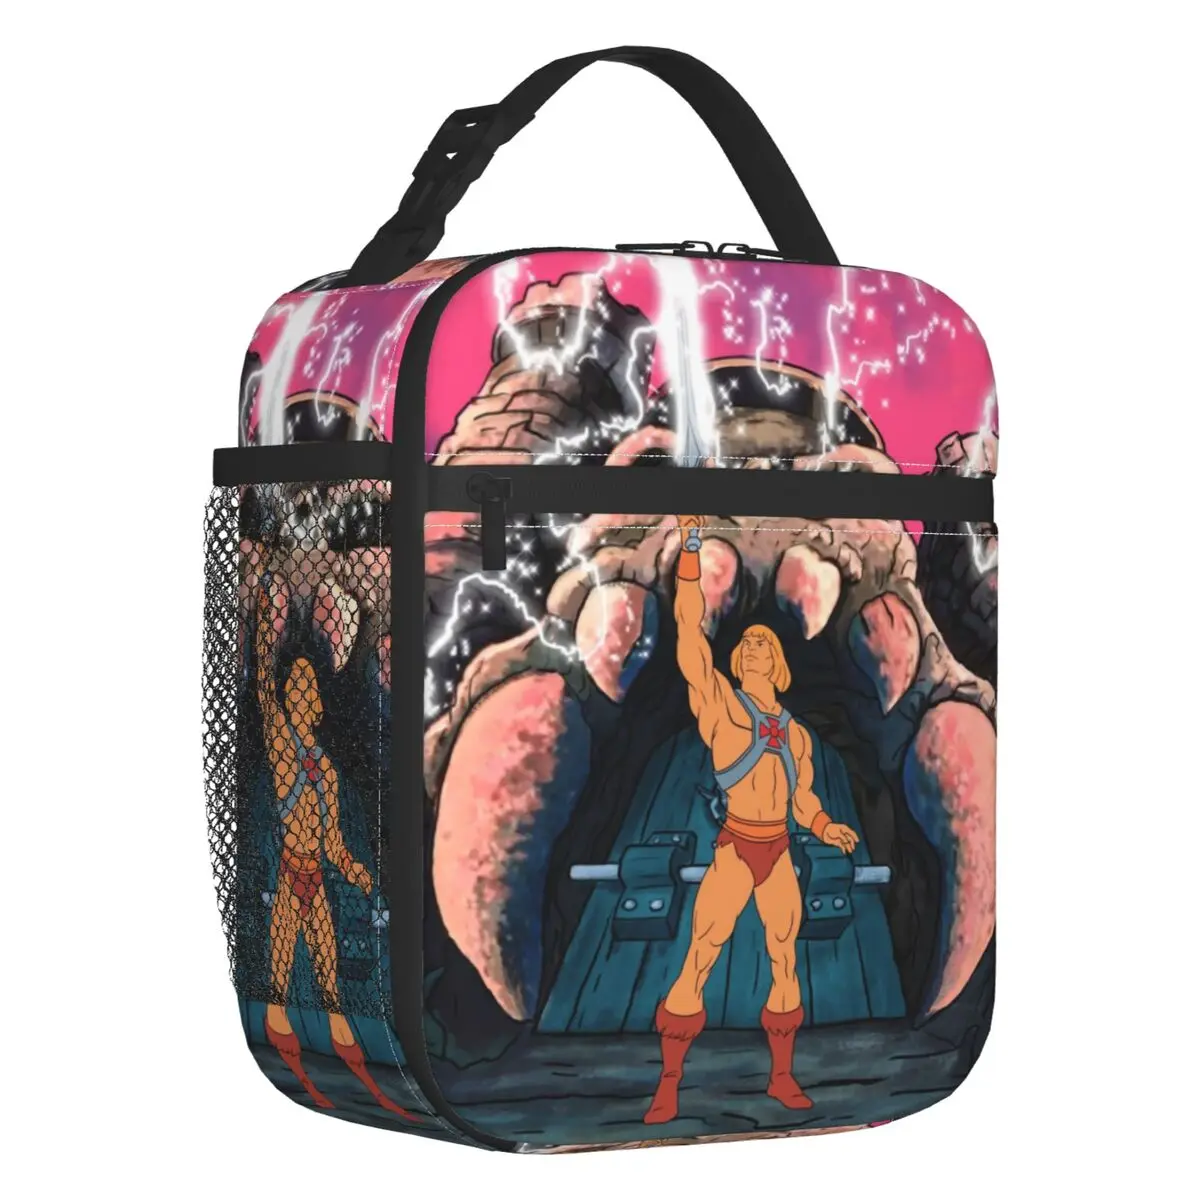 He-Man Transform Insulated Lunch Bag for Camping Travel Masters of the Universe Resuable Cooler Thermal Bento Box Women Children